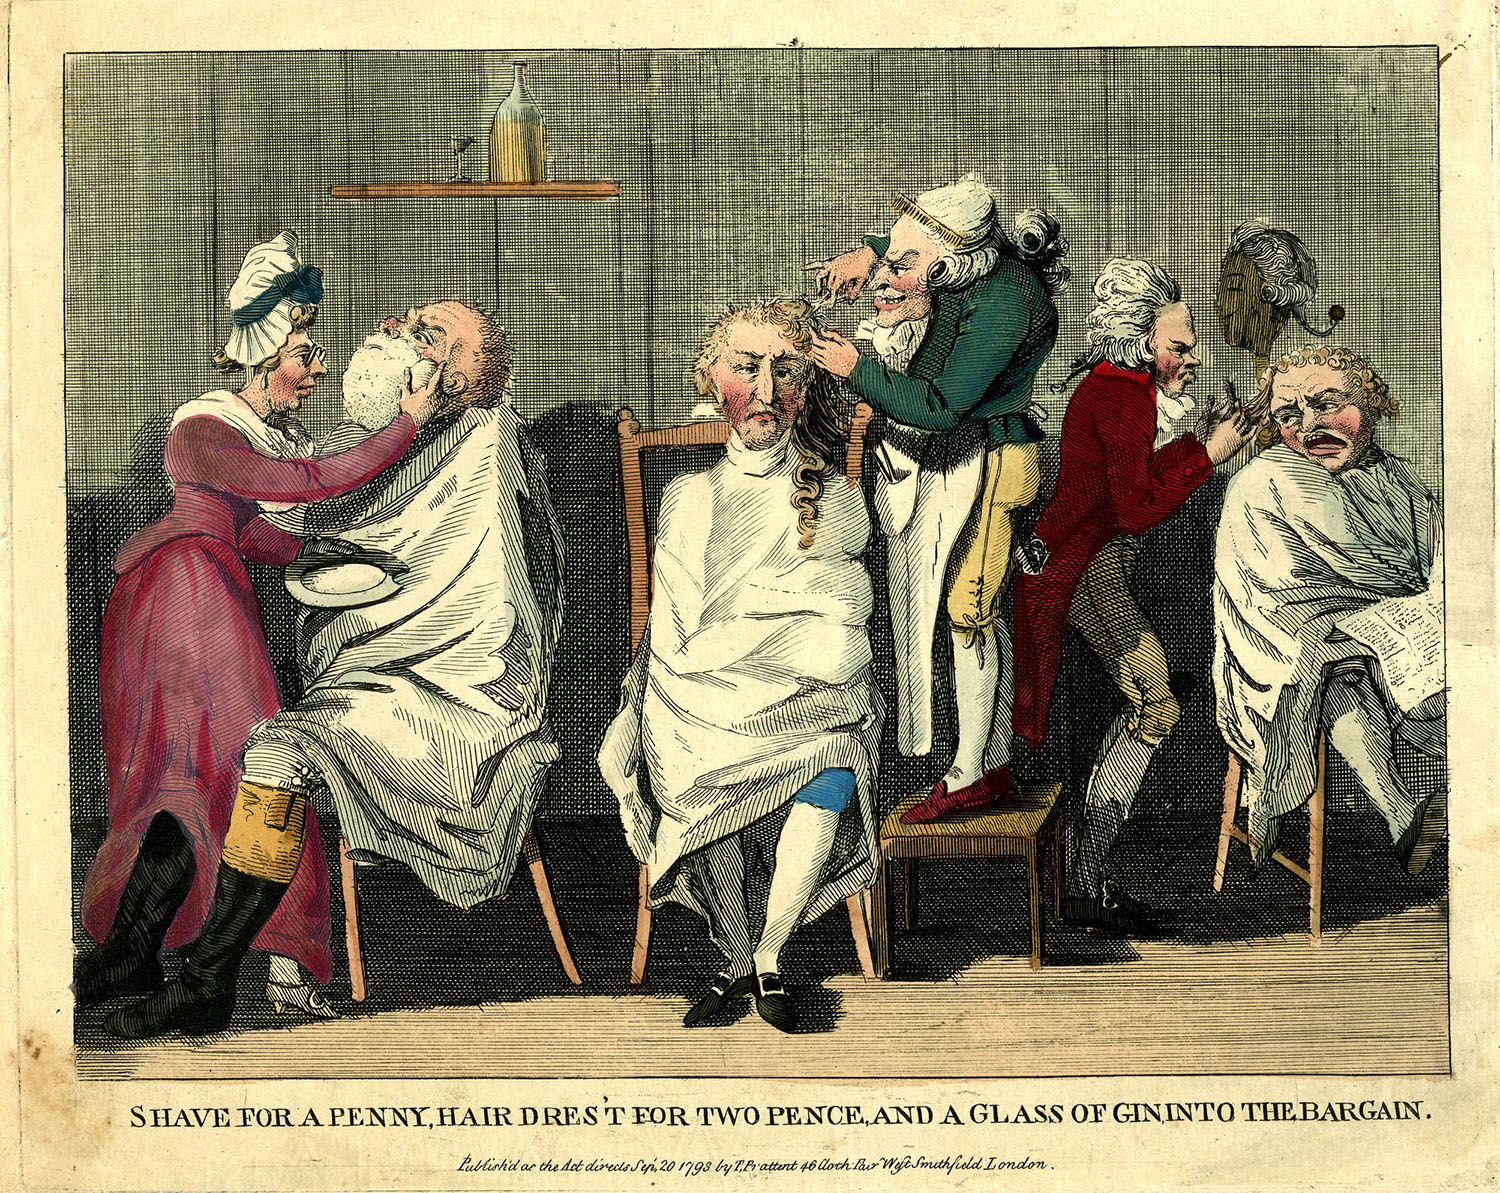 Shave for a Penny, Hair Dres’t for Two Pence, And a Glass of Gin into the Bargain, 1793. Courtesy of the British Museum.